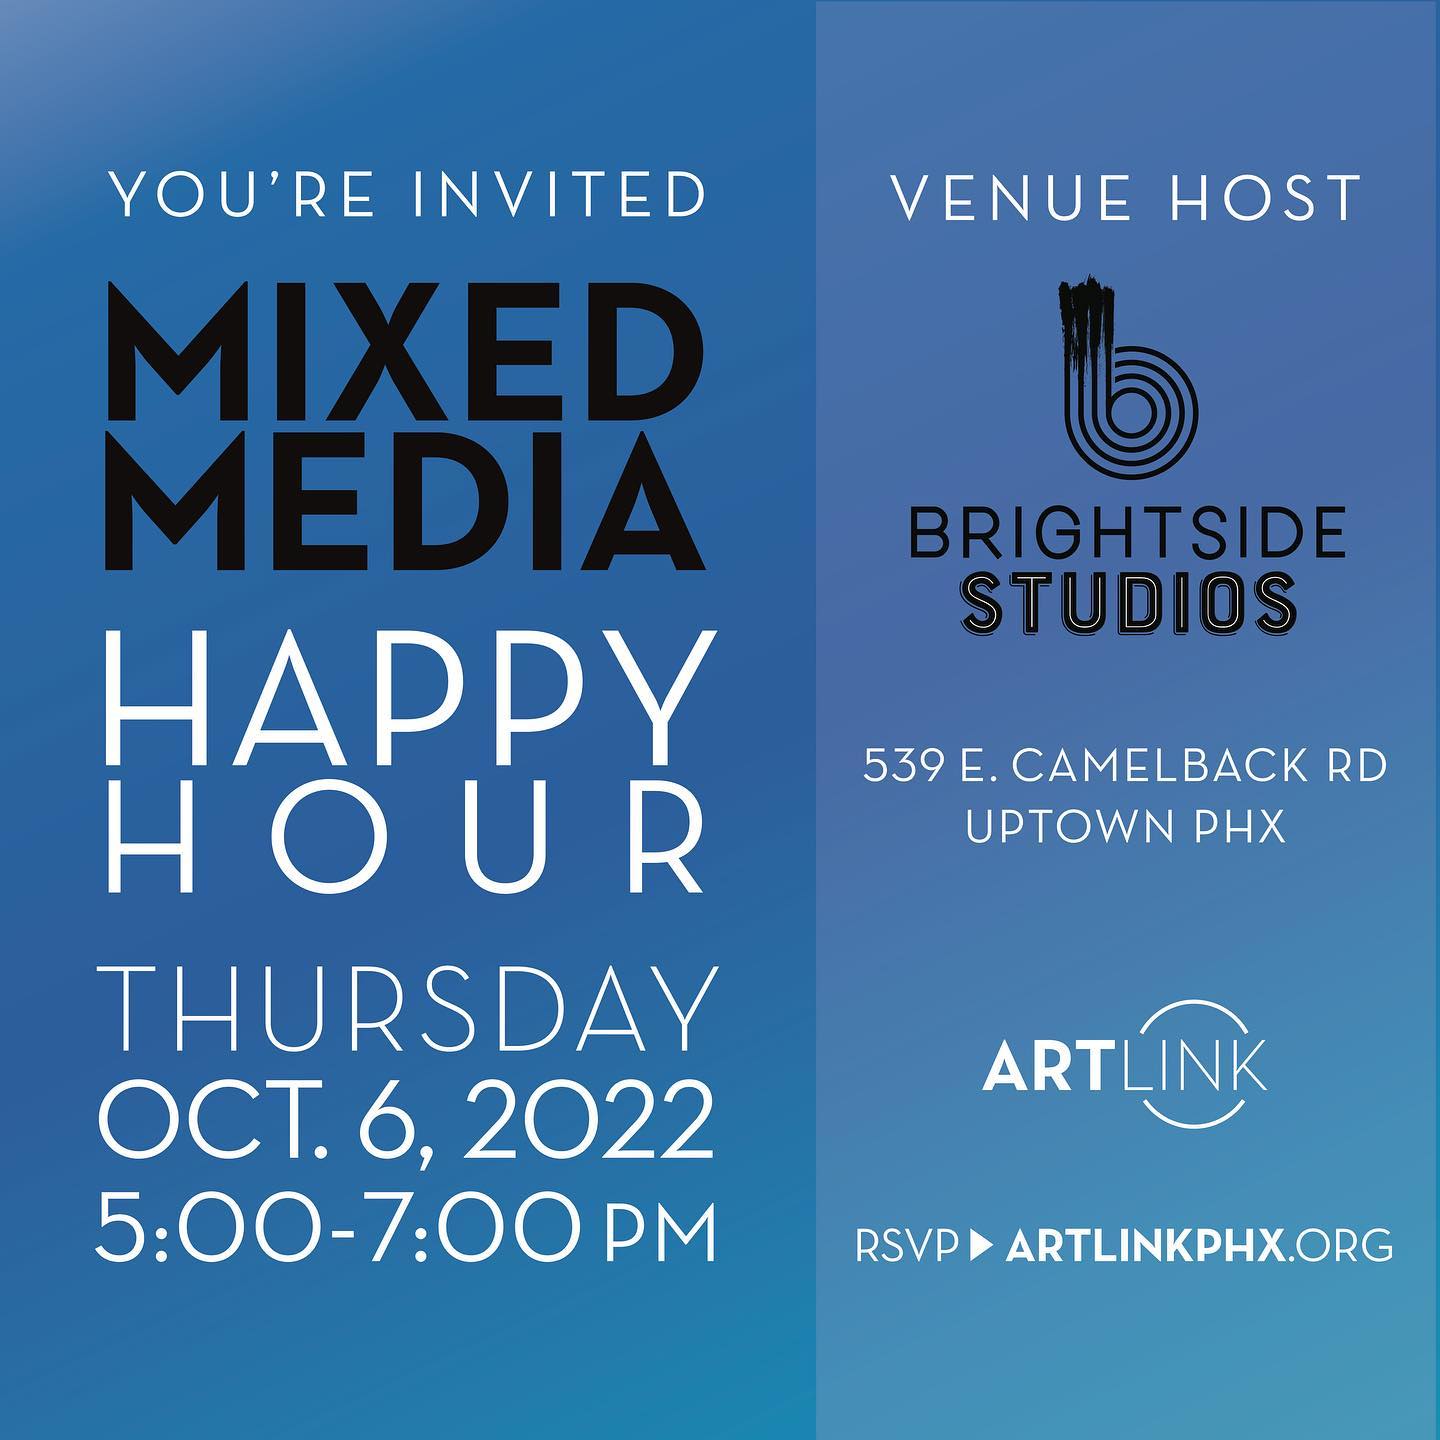 The arts season is in full swing! Come mix and mingle at the Mixed Media Happy Hour in Brightside Studios and learn about upcoming artist opportunities and arts happenings that contribute to our creative culture. All artists, arts advocates and business community members are invited.
Date: Thursday, October 6, 2022
Time: 5:00 – 7:00 p.m.
Location: Brightside Studios
Cost: Free admission, no host bar
Hosted by: Artlink Inc.
RSVP: https://artlinkphx.org/